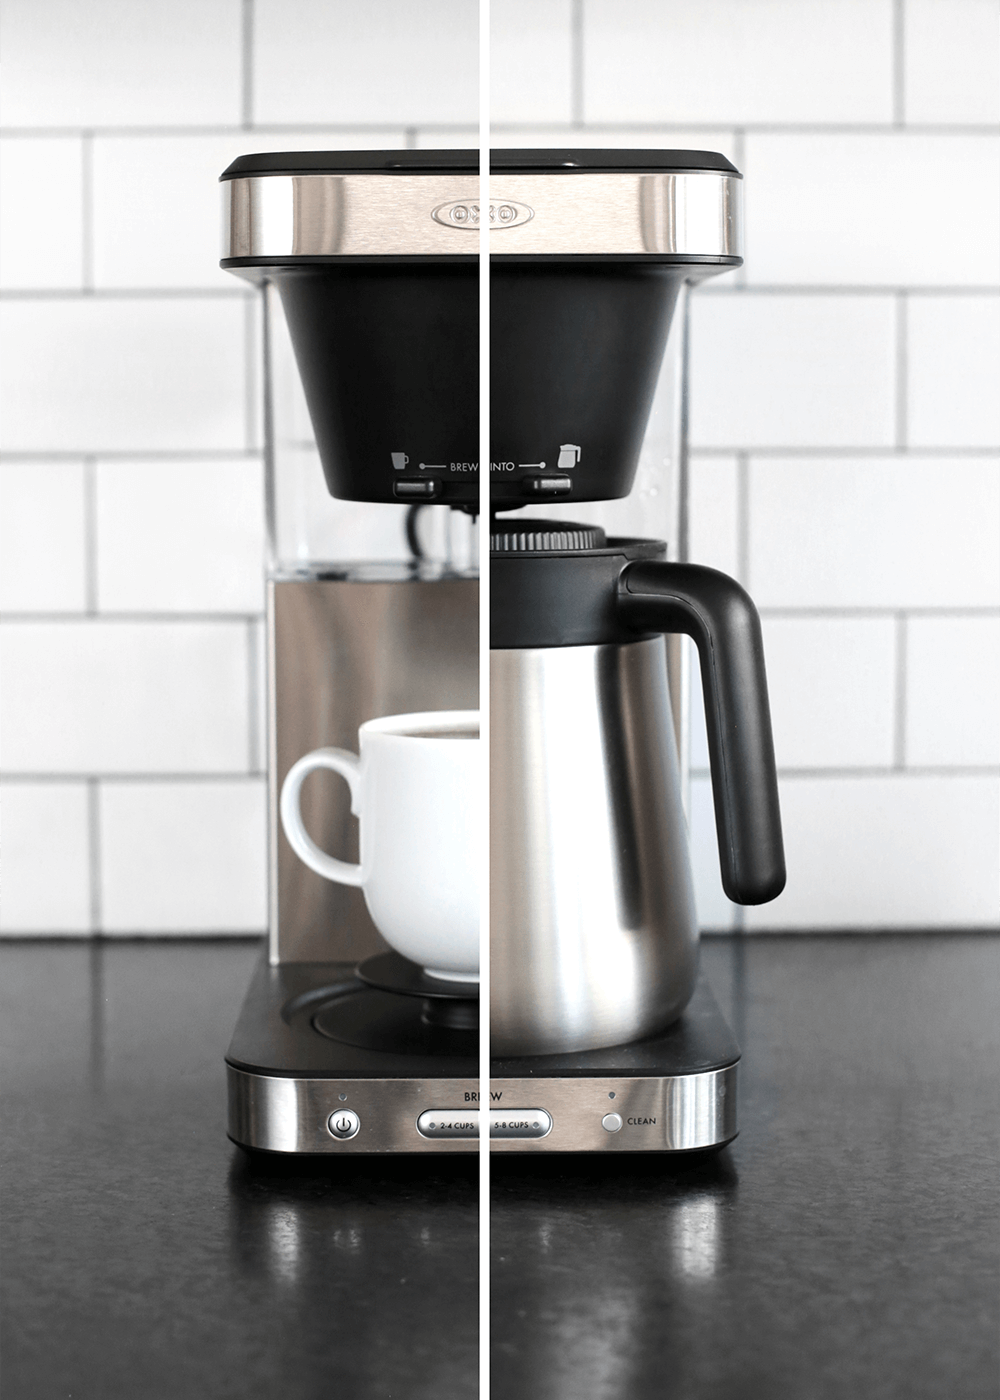 OXO Brew 8-cup coffee maker